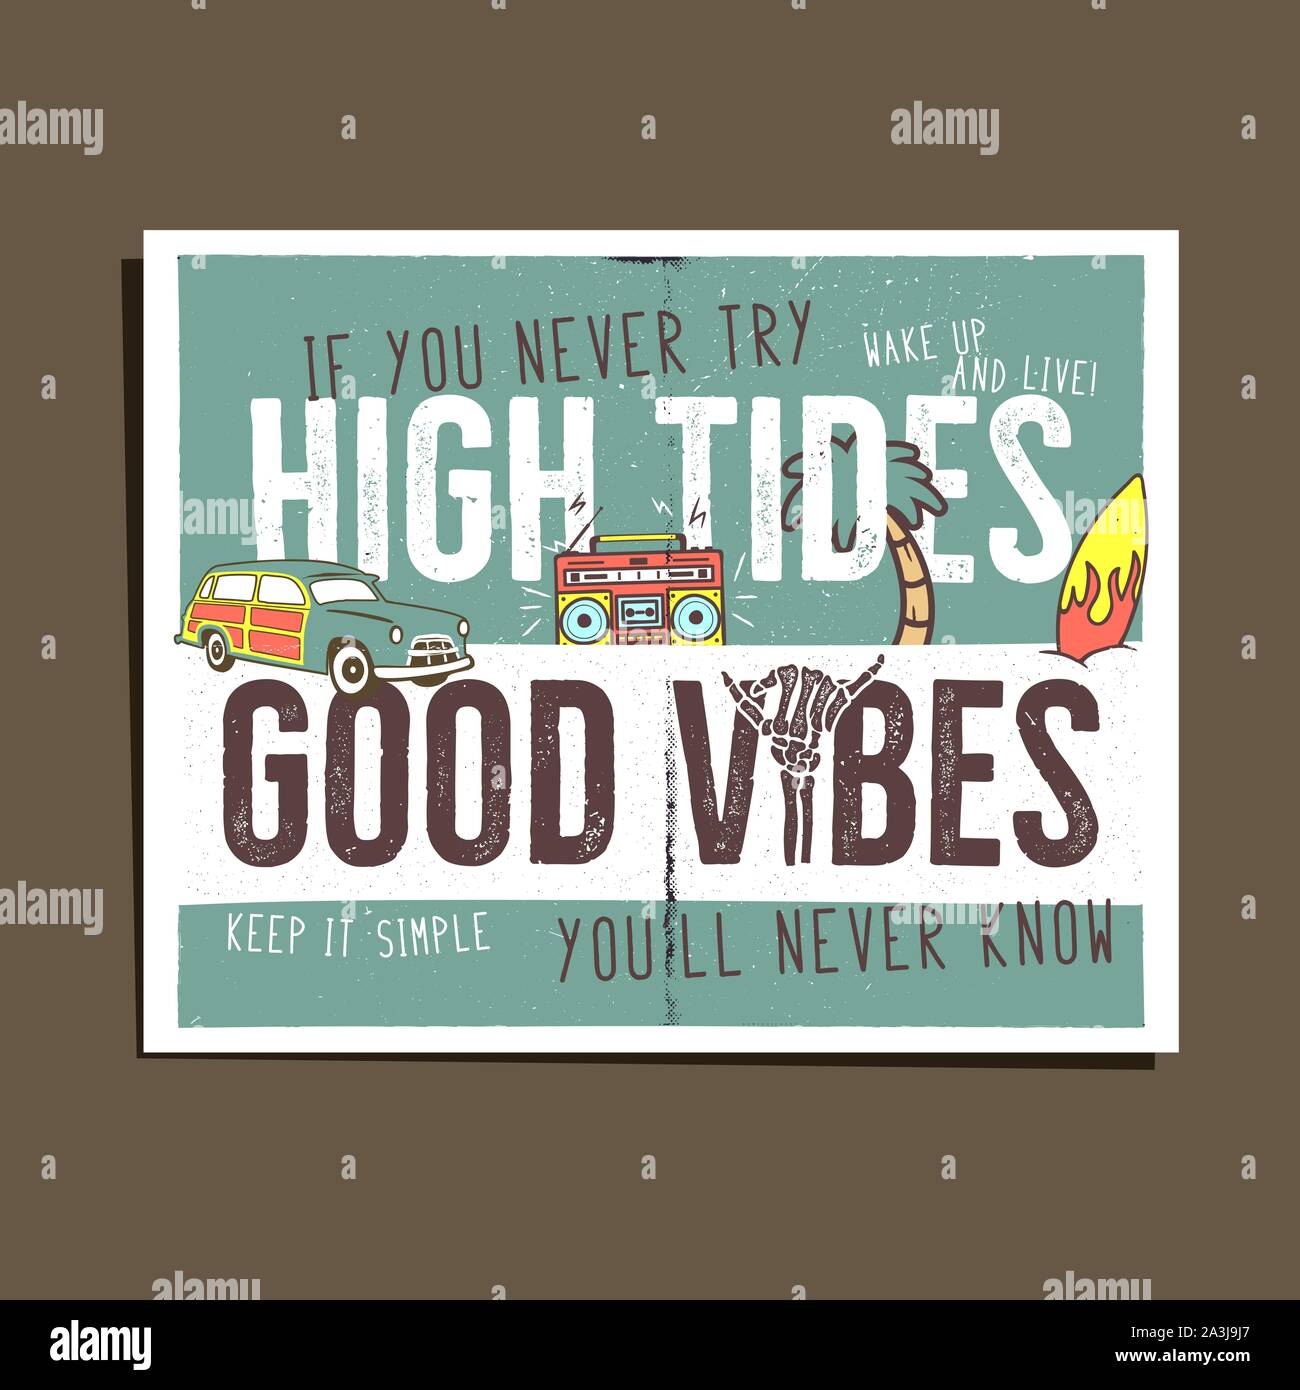 VIntage summer adventure print design, poster for t shirt, poster. High tides, good vibes typography slogan. Surf car, retro tape and surfboard Stock Vector